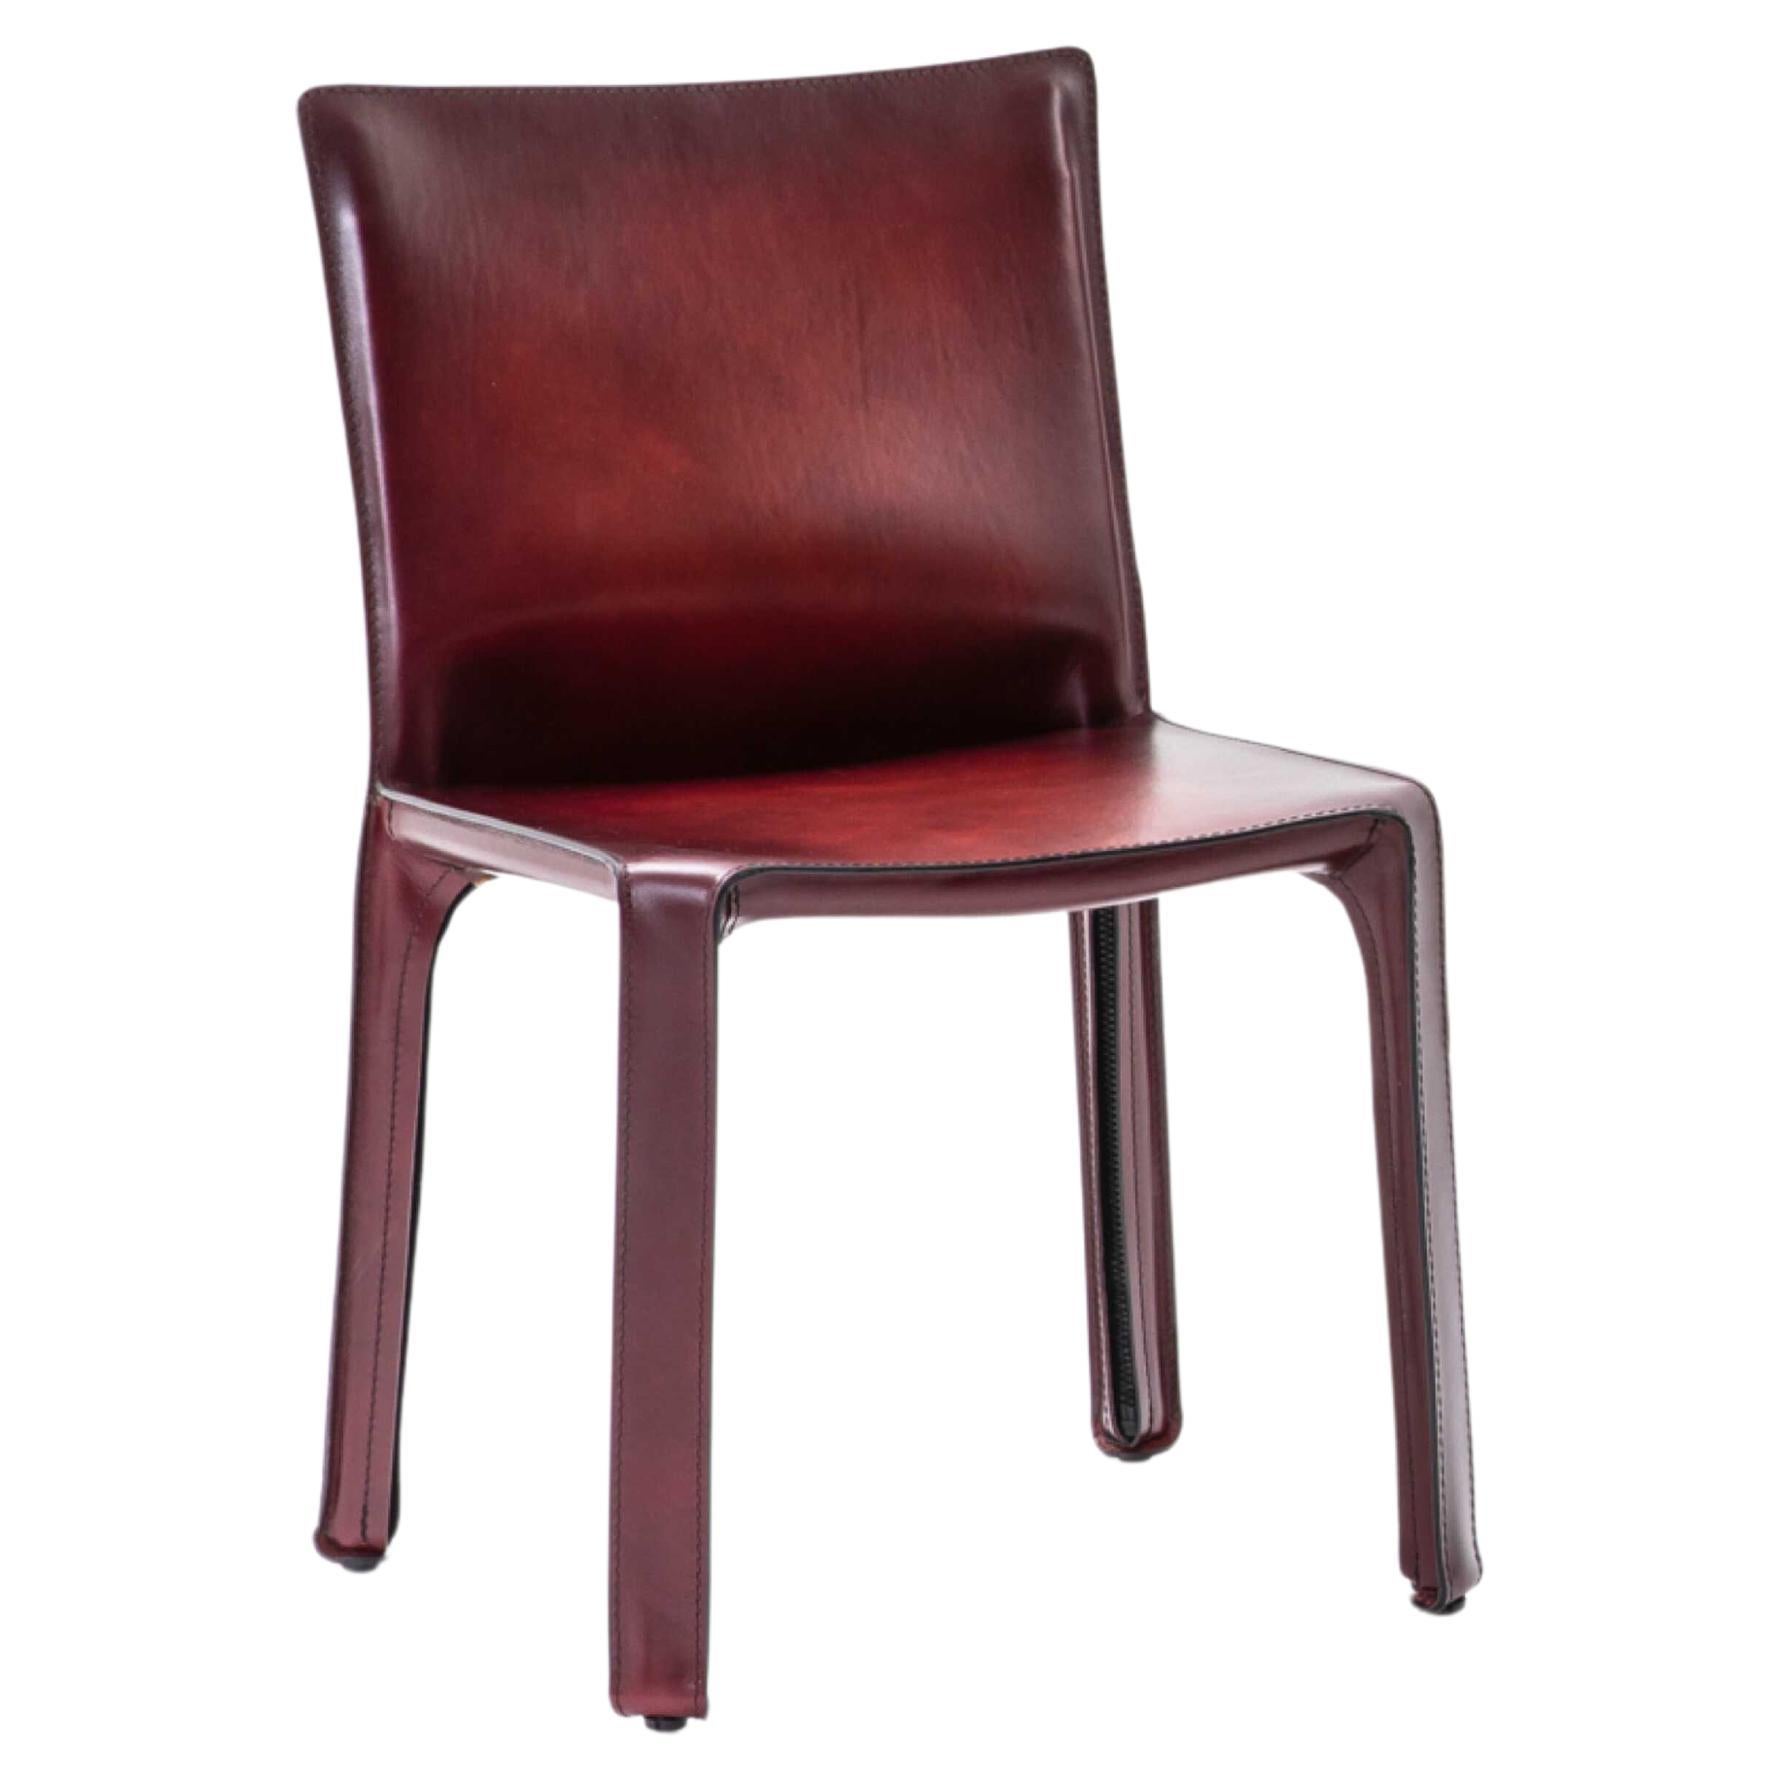 Mario Bellini Cab 412 cowhide chair for Cassina, Italy - new For Sale